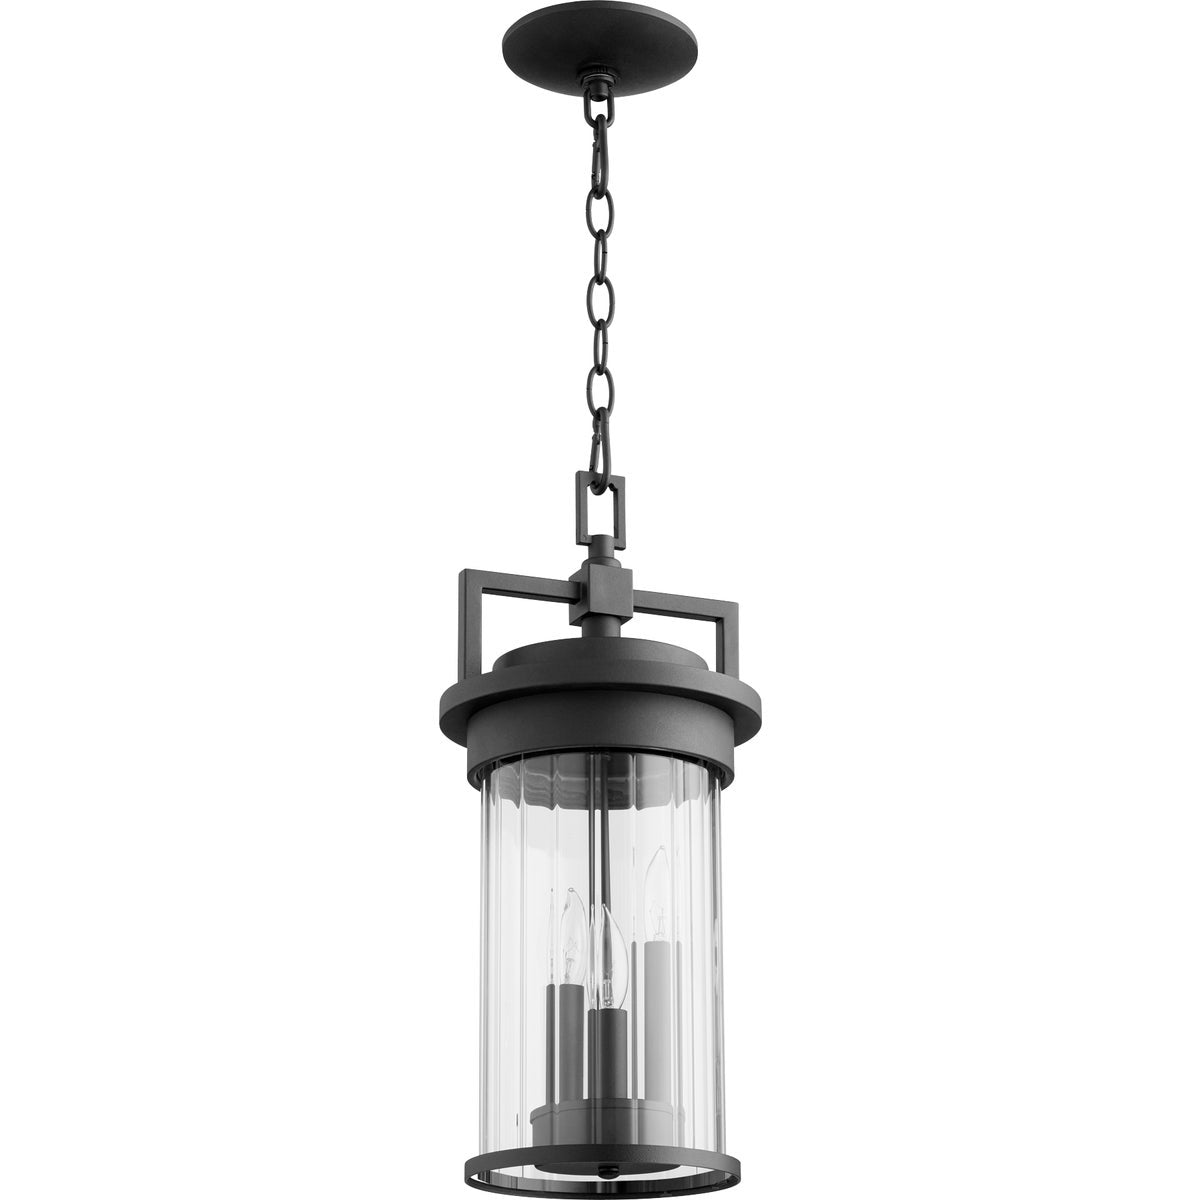 Contemporary Outdoor Hanging Light with clear glass shade, crafted from durable metal. Drum-shaped silhouette with clean lines. Wet location rated. 40W, 120V, 3 bulbs (not included). Candelabra E12 base. Dimmable. UL Listed. 8&quot;W x 18.25&quot;H. 2-year warranty.